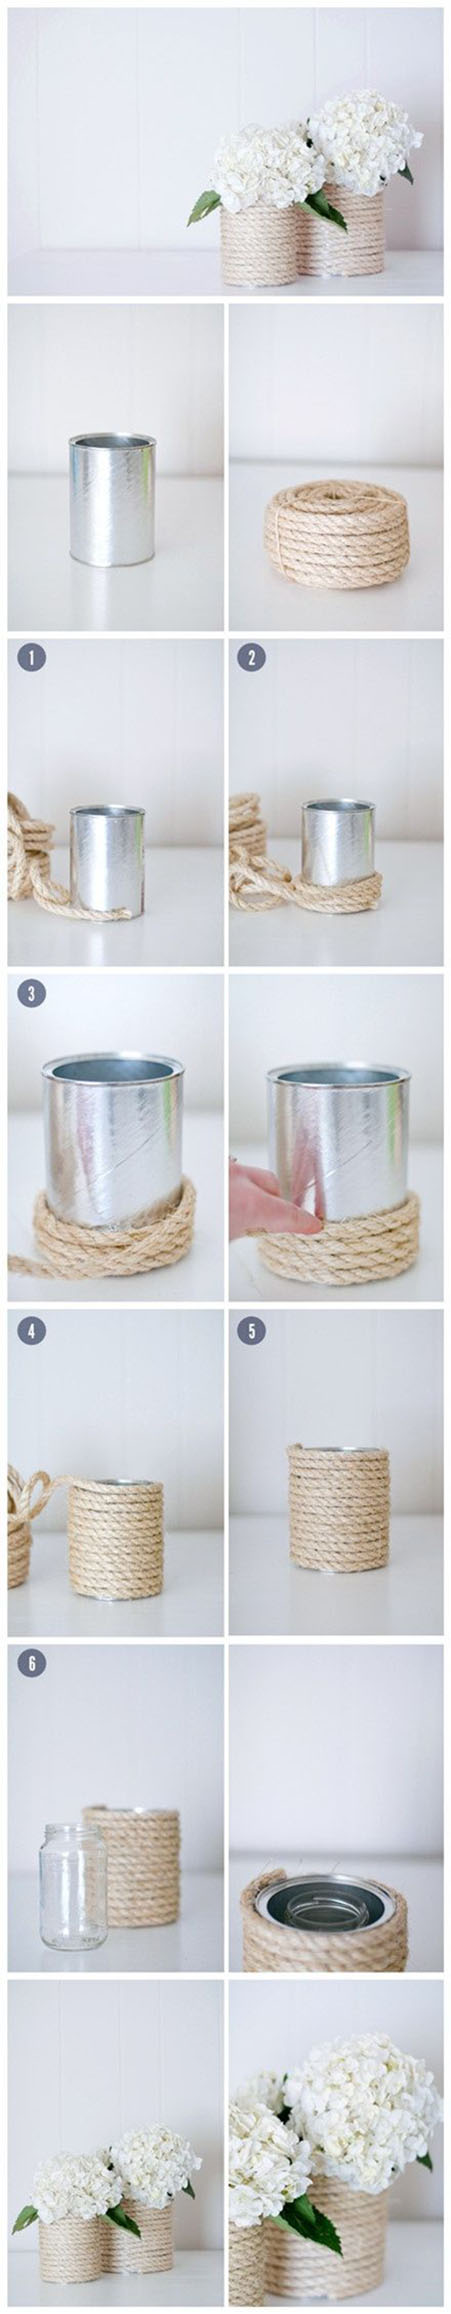 3 Rope covered coffee cans255222f4e